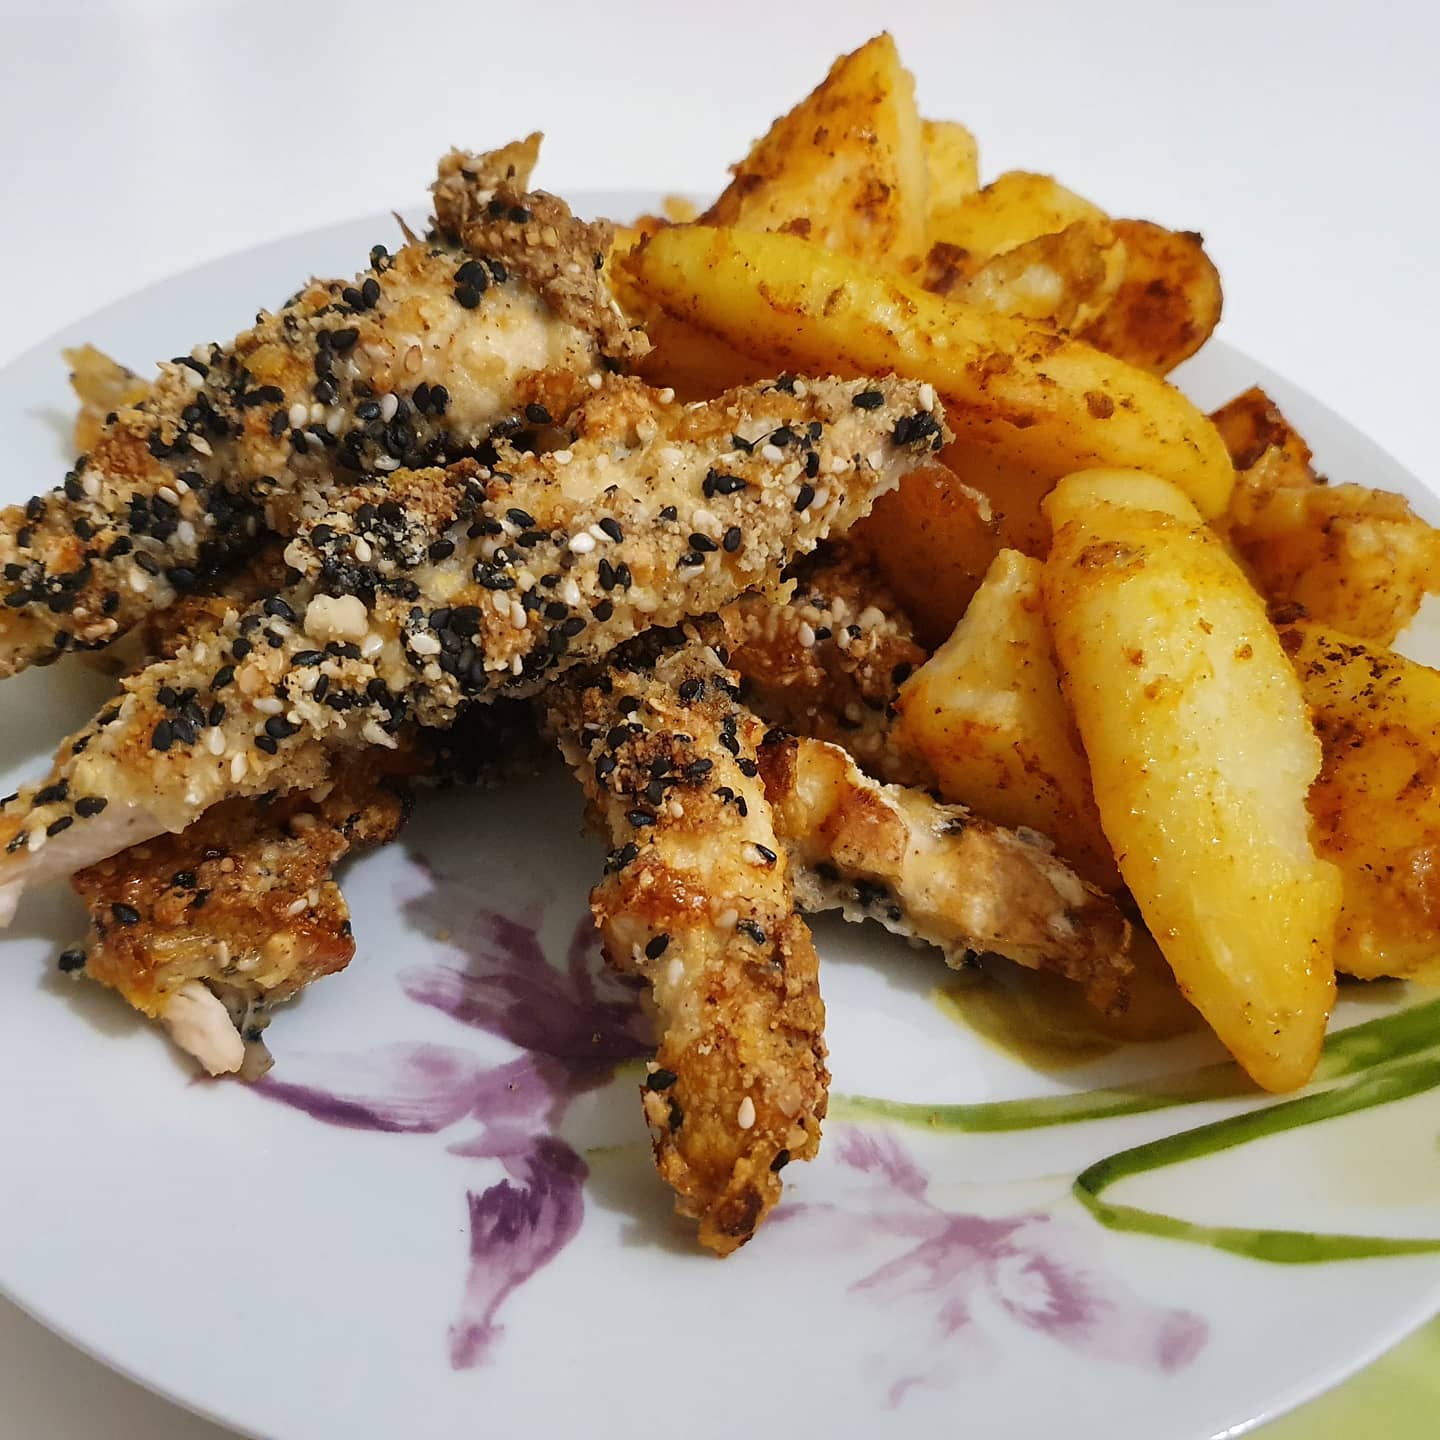 Oven baked schnitzel with corn flakes, sesame seeds and peanuts